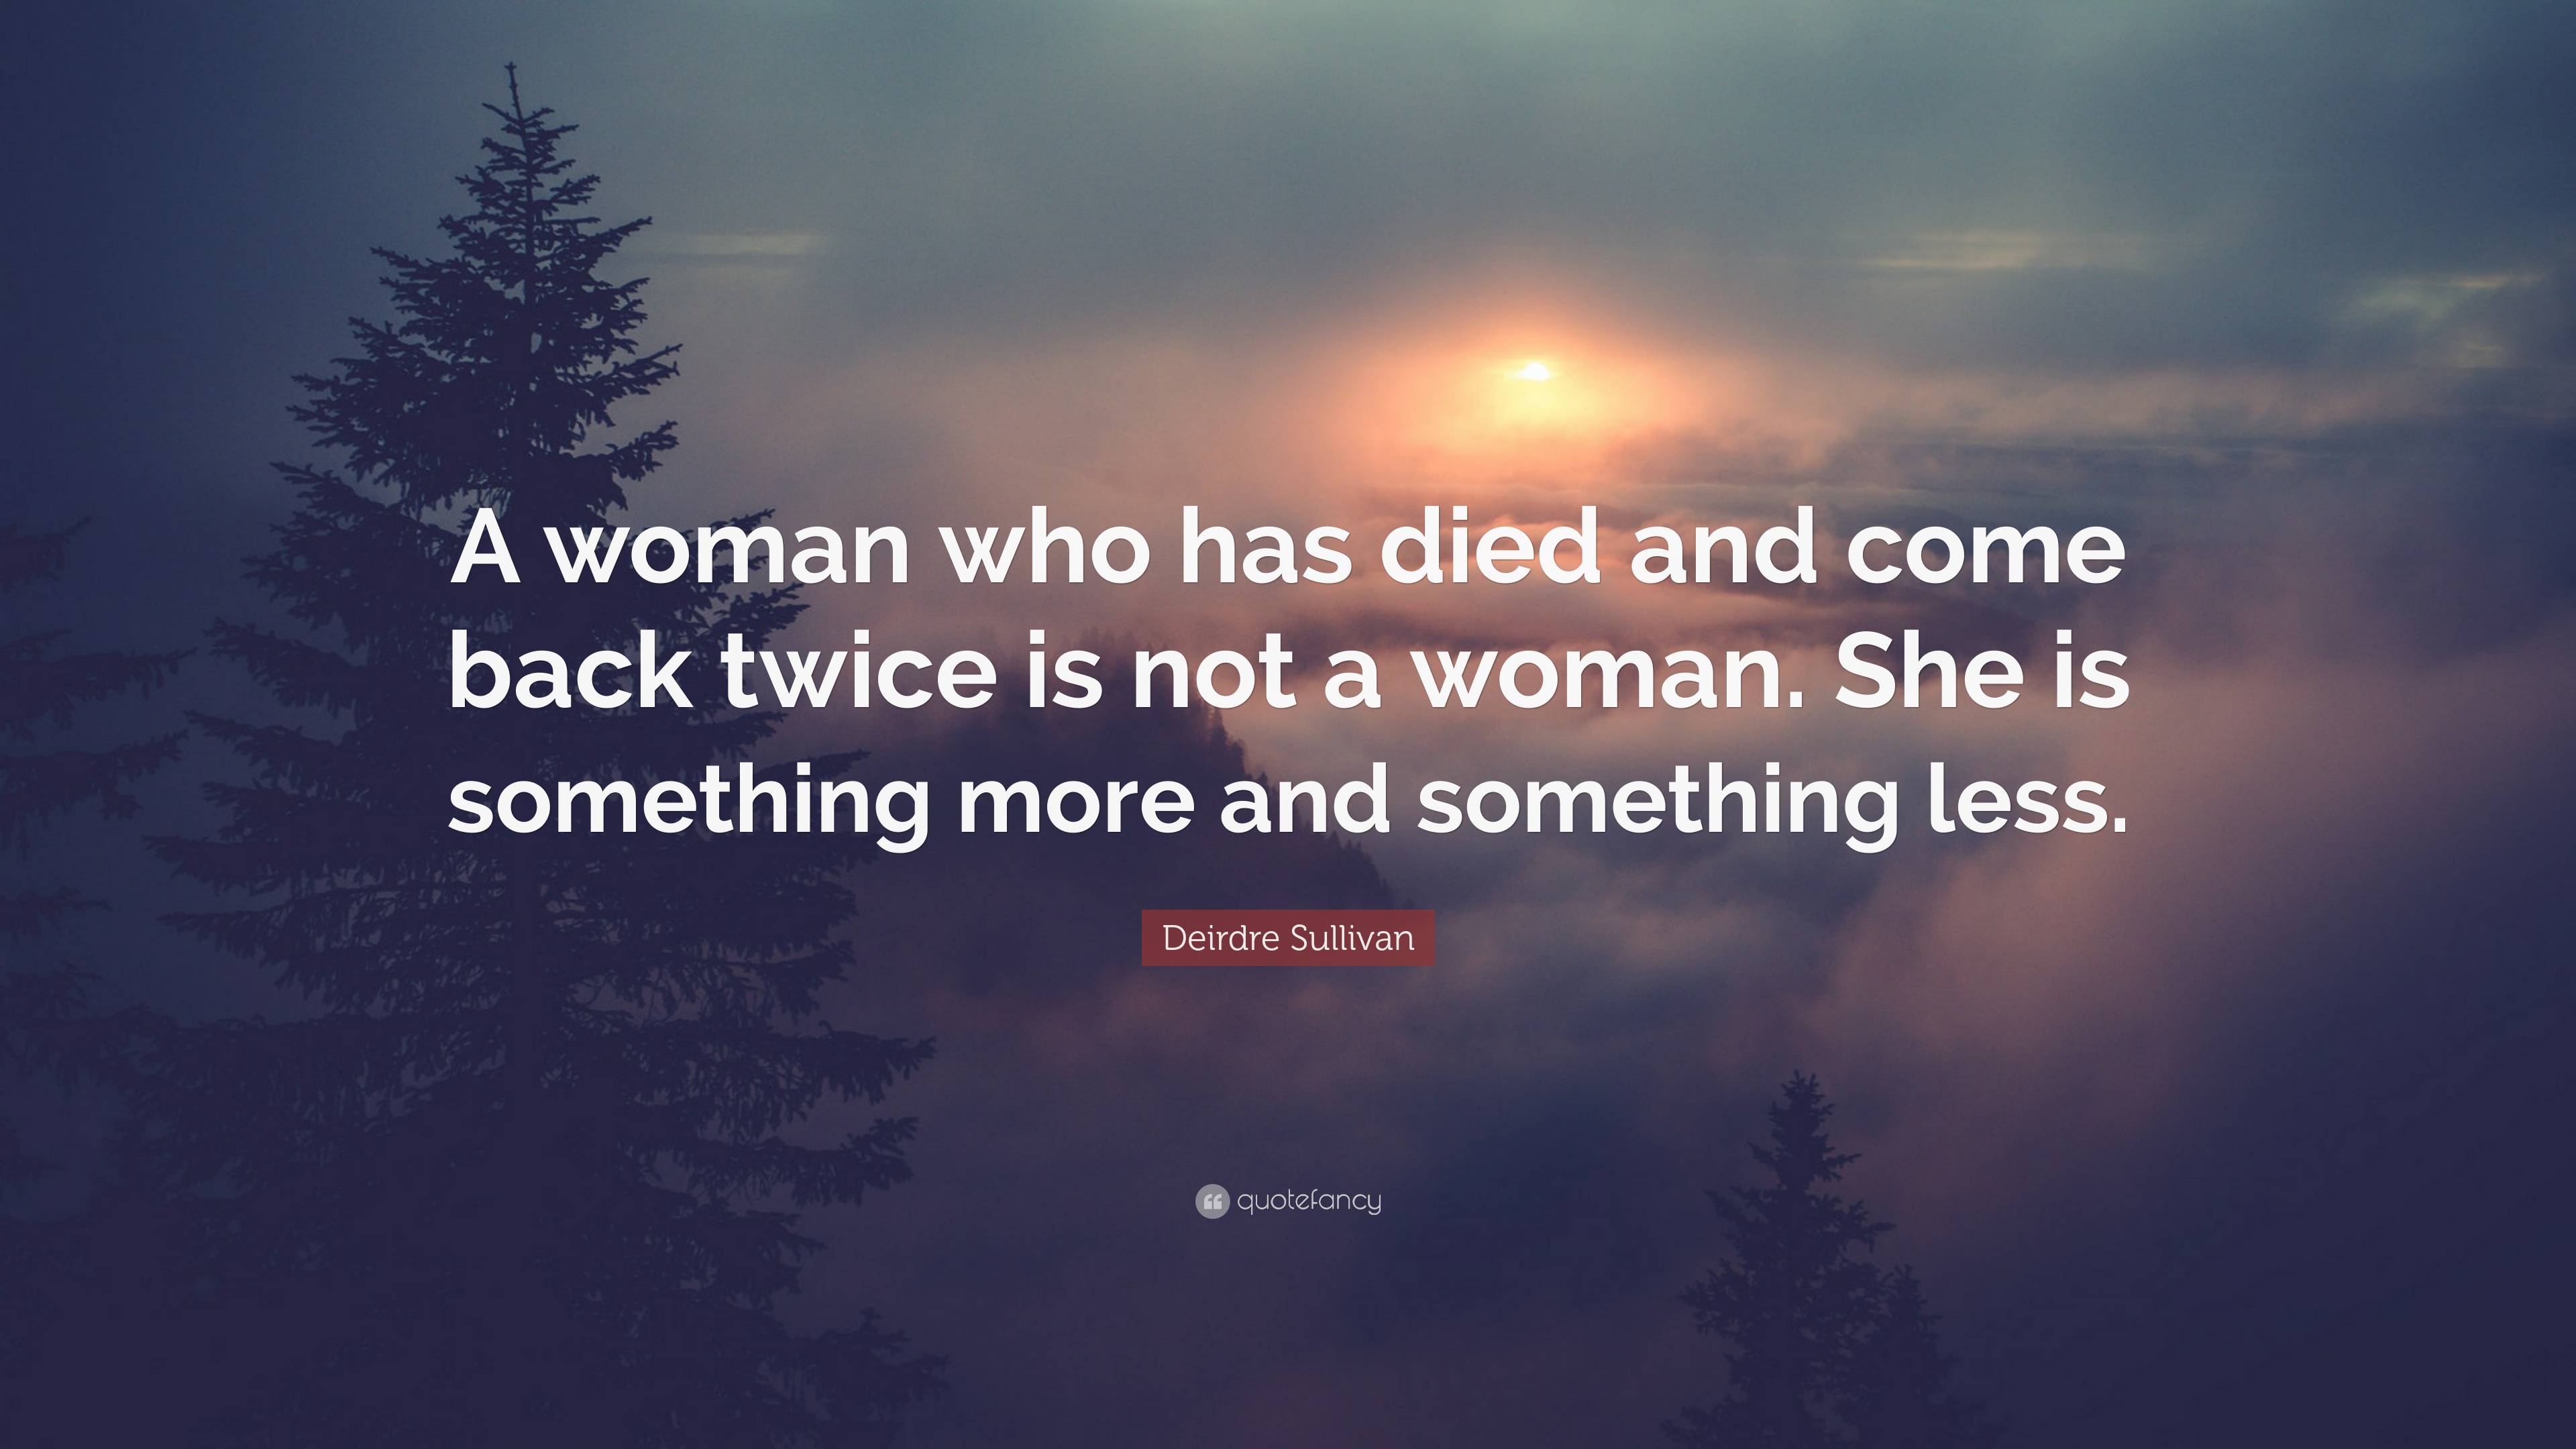 Deirdre Sullivan Quote: “A woman who has died and come back twice is ...